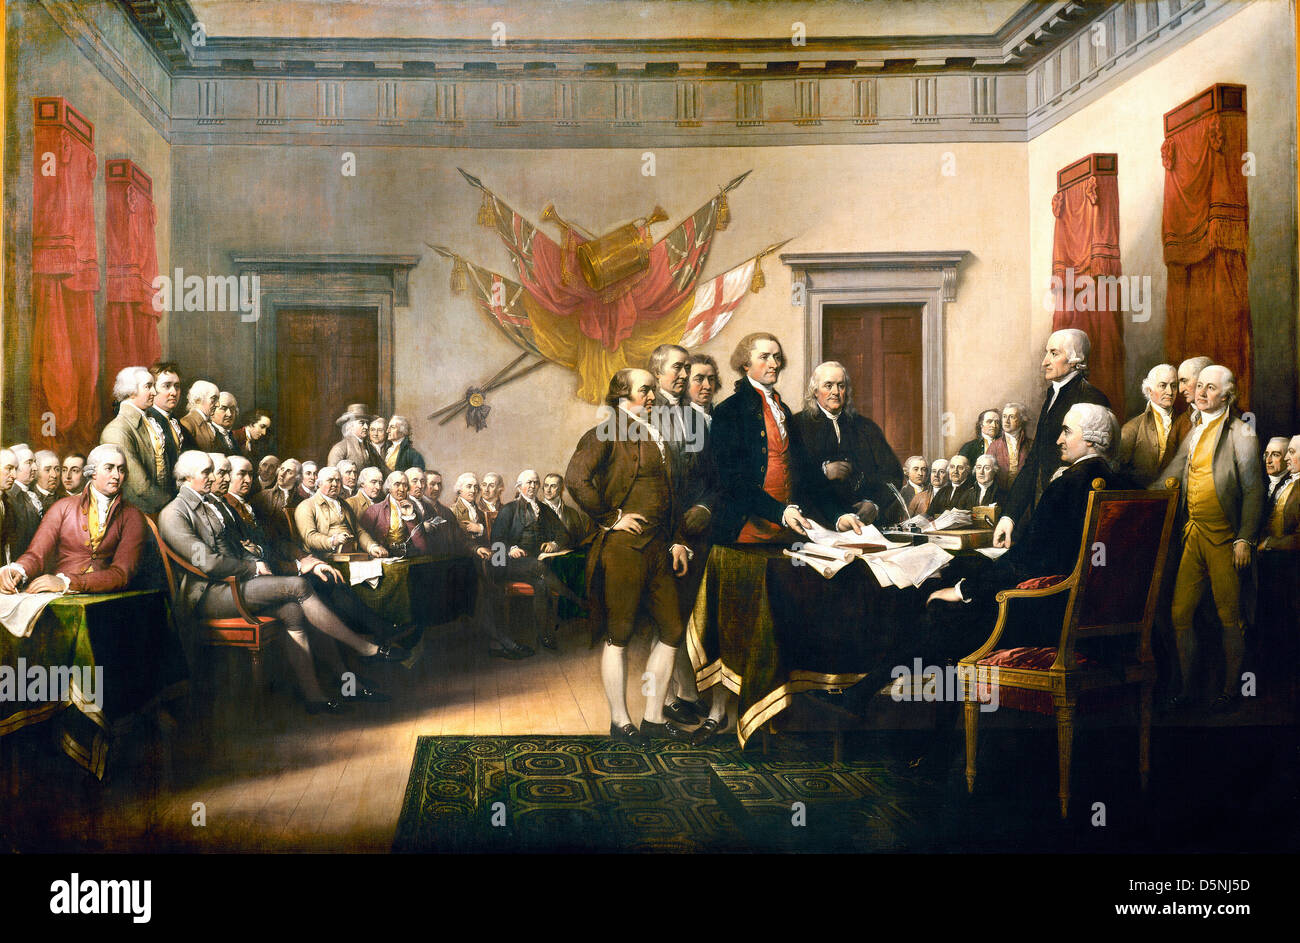 John Trumbull, Declaration of Independence 1819 US Capitol rotunda. The painting can be found on the back of the U.S. $2 bill. Stock Photo